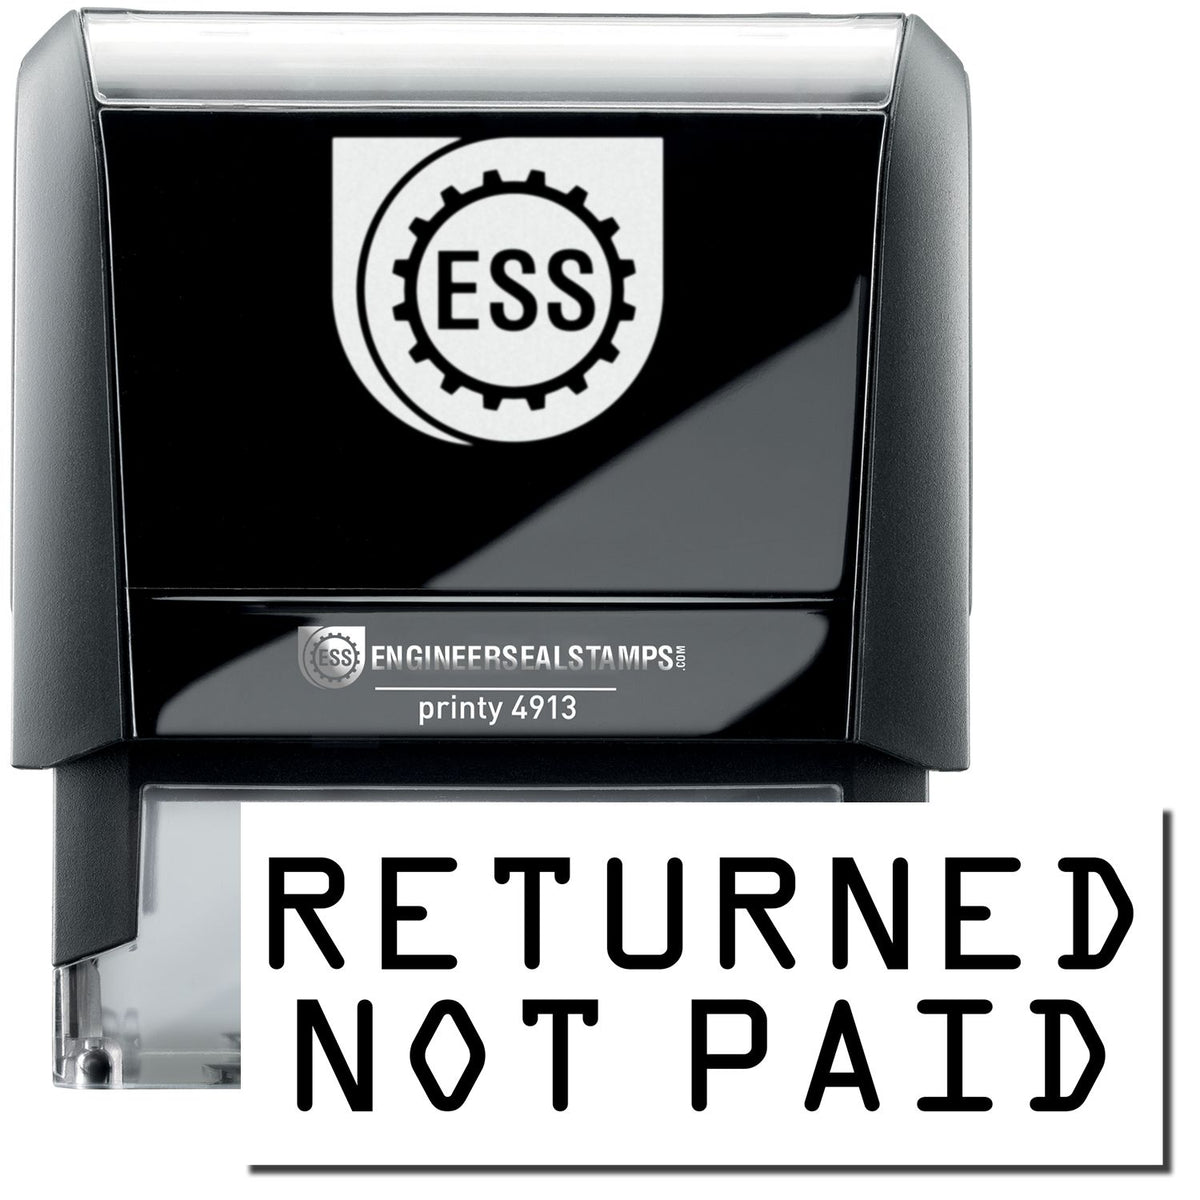 A self-inking stamp with a stamped image showing how the text &quot;RETURNED NOT PAID&quot; in a large bold font is displayed by it.